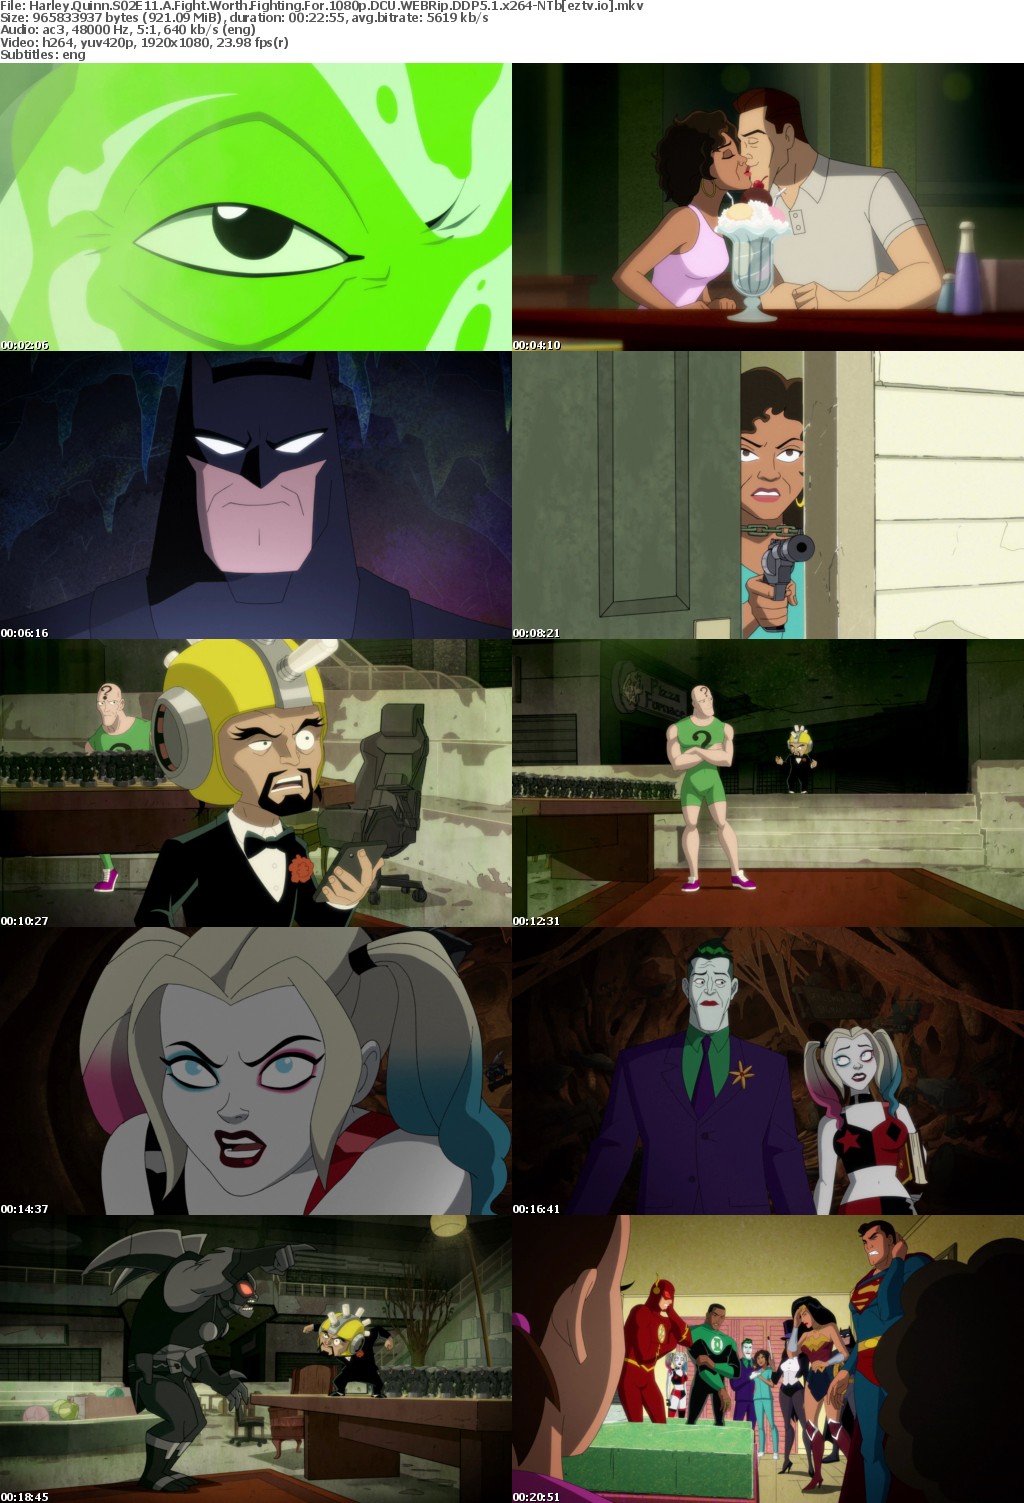 Harley Quinn S02E11 A Fight Worth Fighting For 1080p DCU WEBRip DDP5 1 x264-NTb